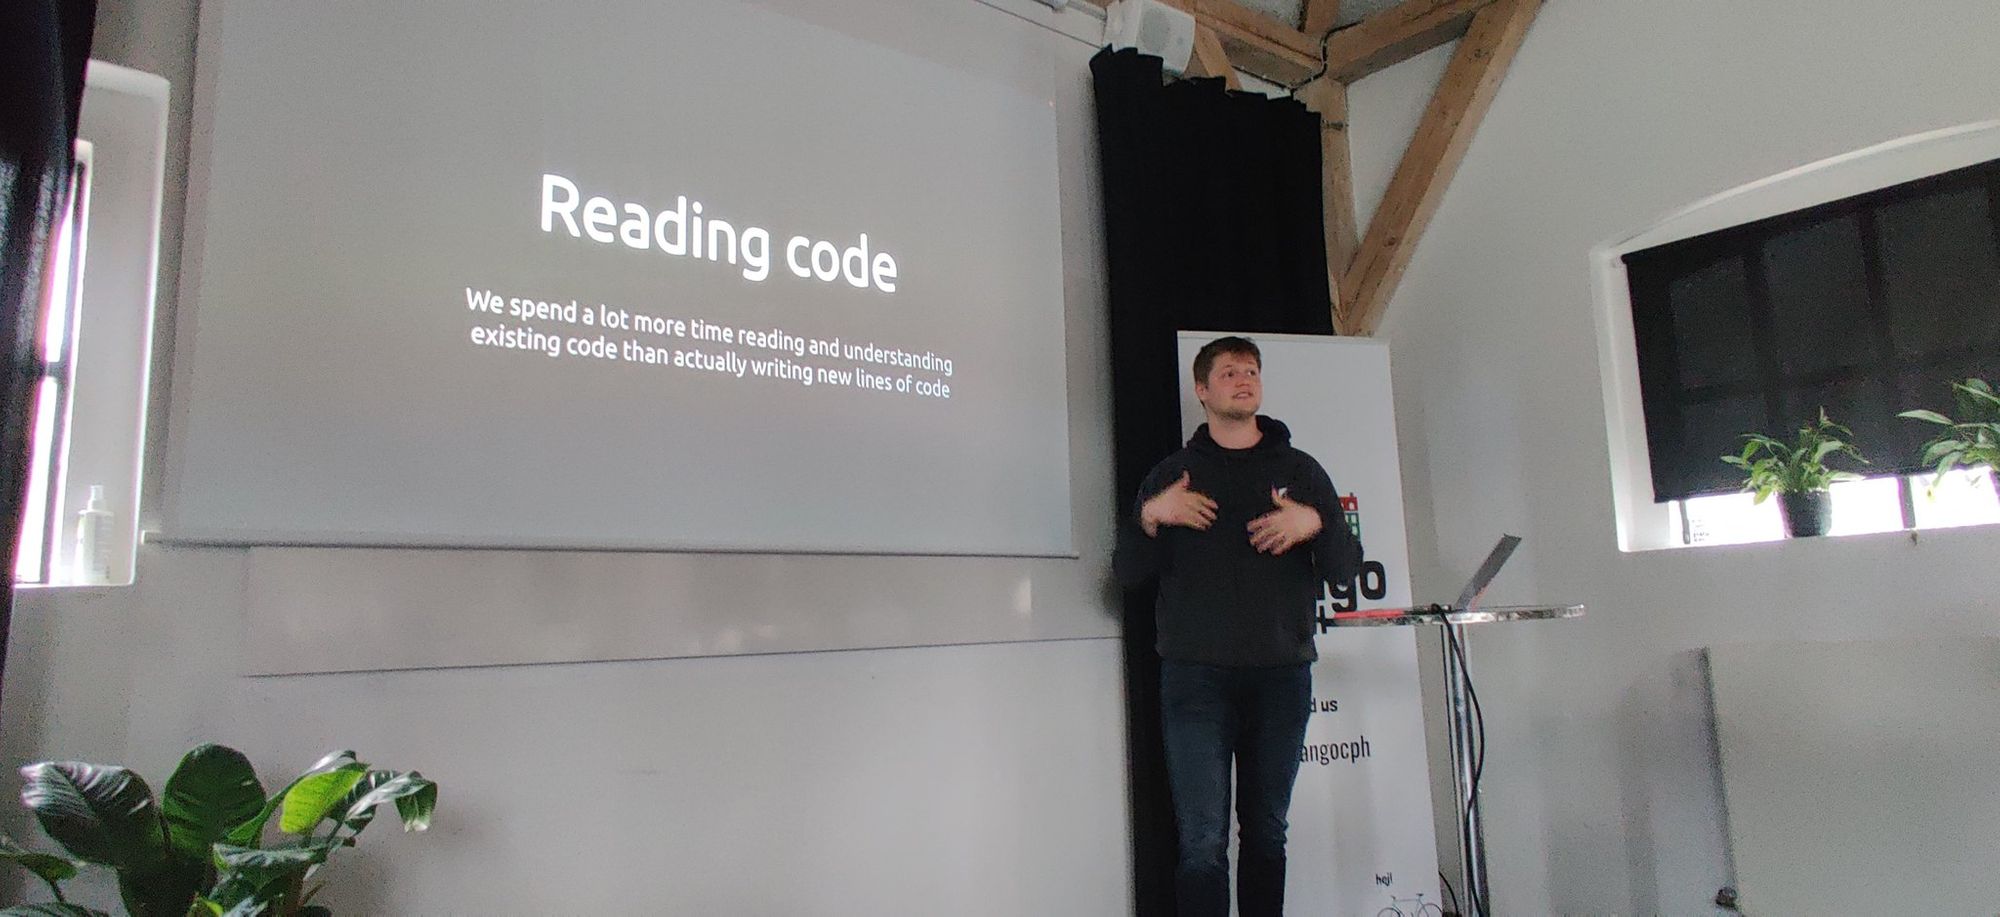 Wilhelm speaking on stage with a slide about how much more we read code than we write it